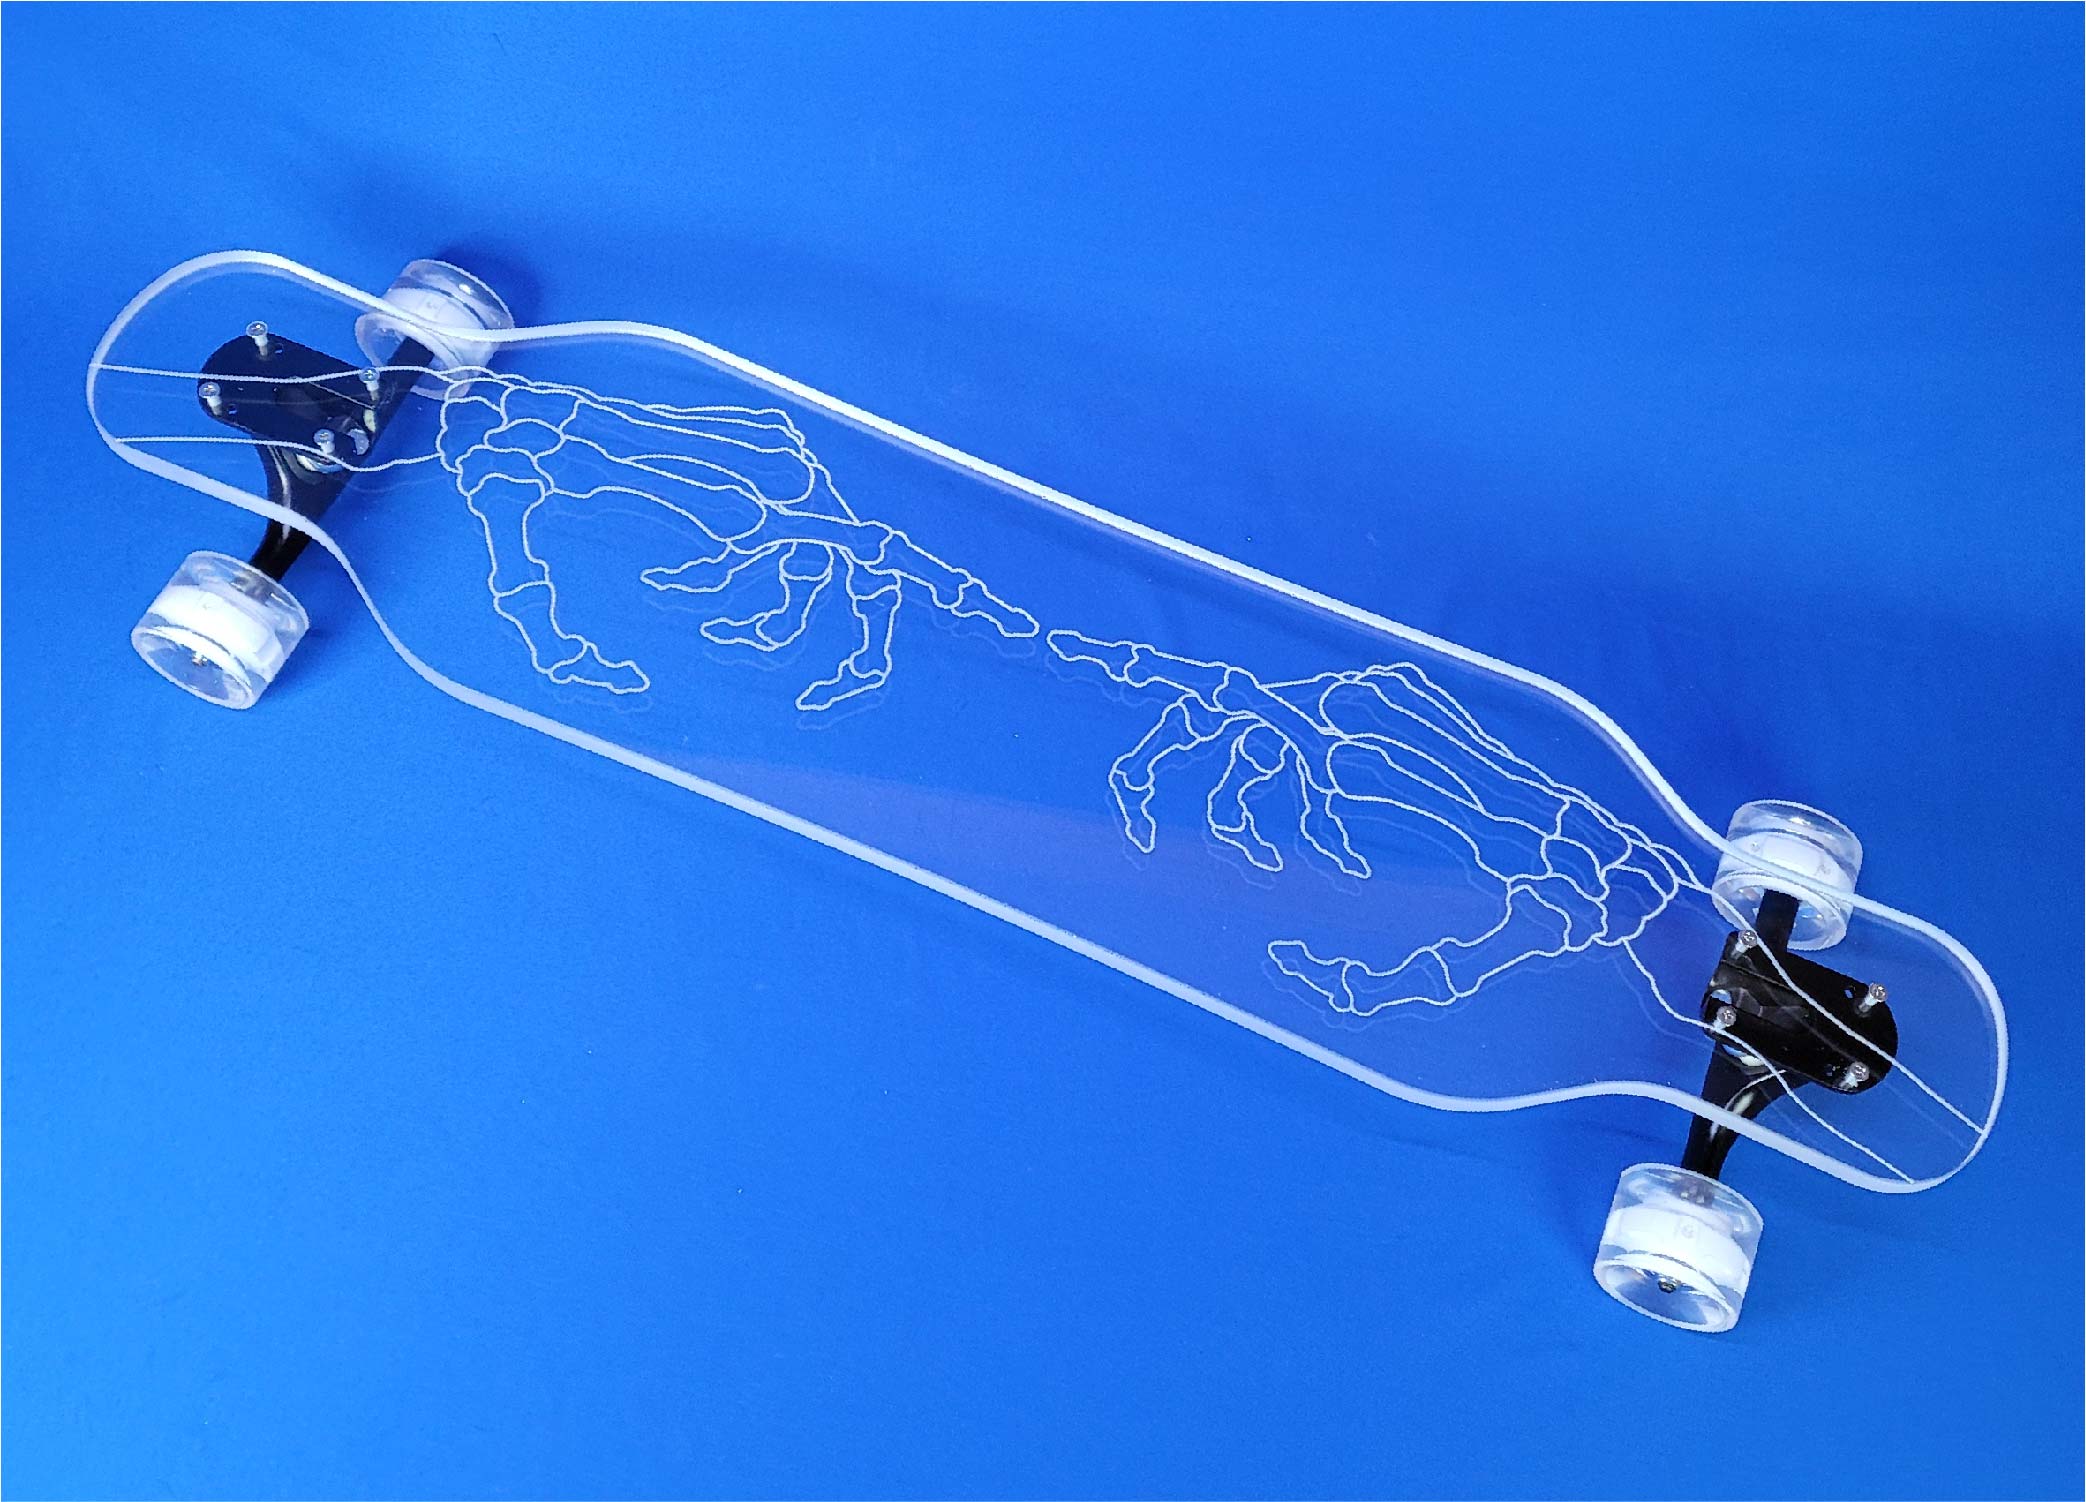 Clear Skeleton Hand longboard inspired by Michaelangelo's work on the roof of the Sistine Chapel.